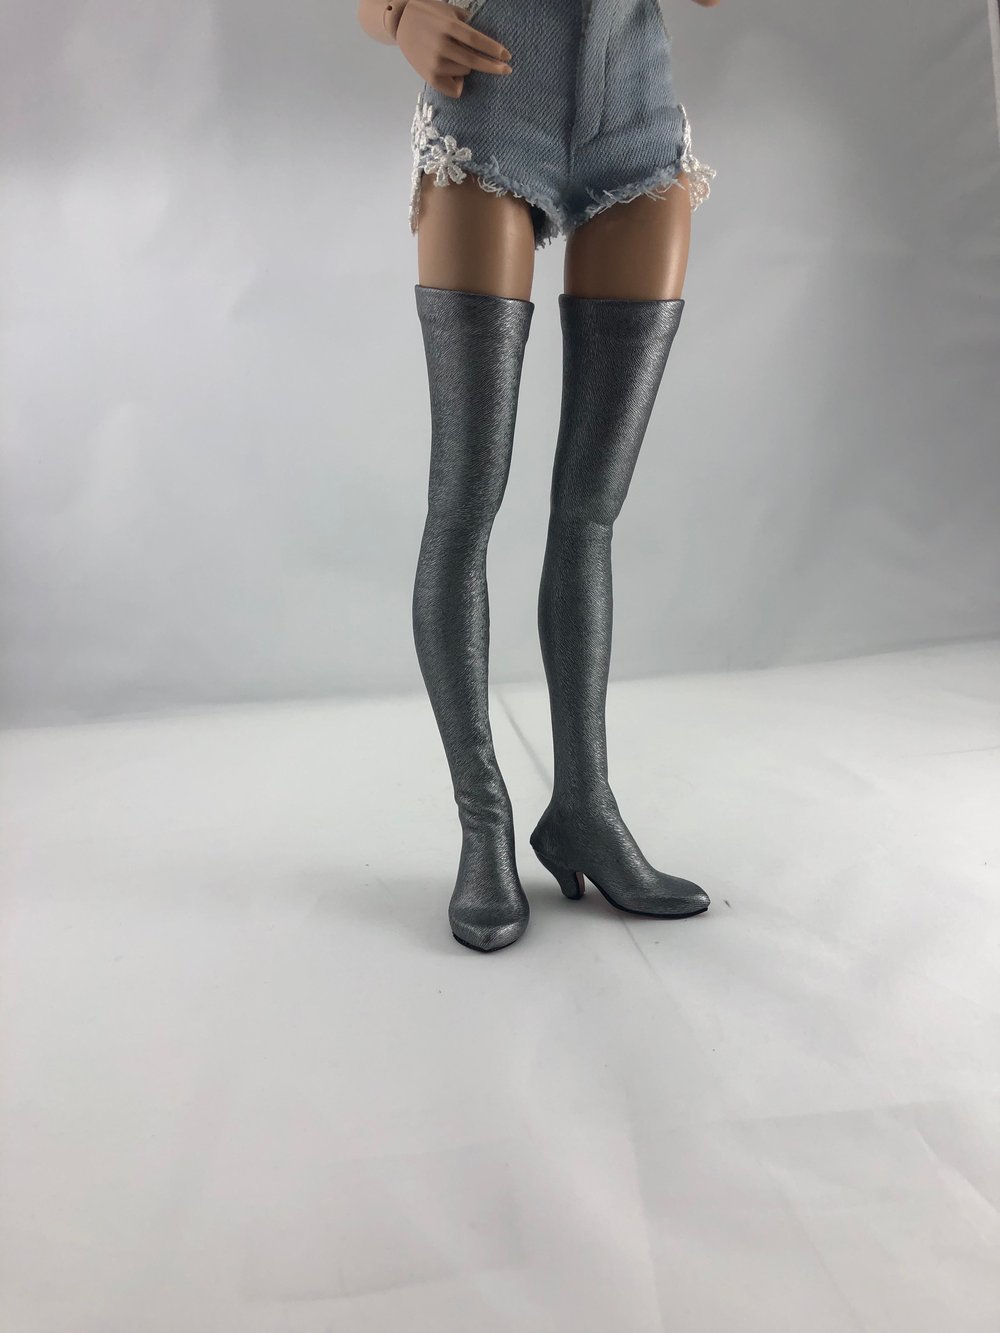 Brushed Silver Thigh High Boots Red Sole: Minifee